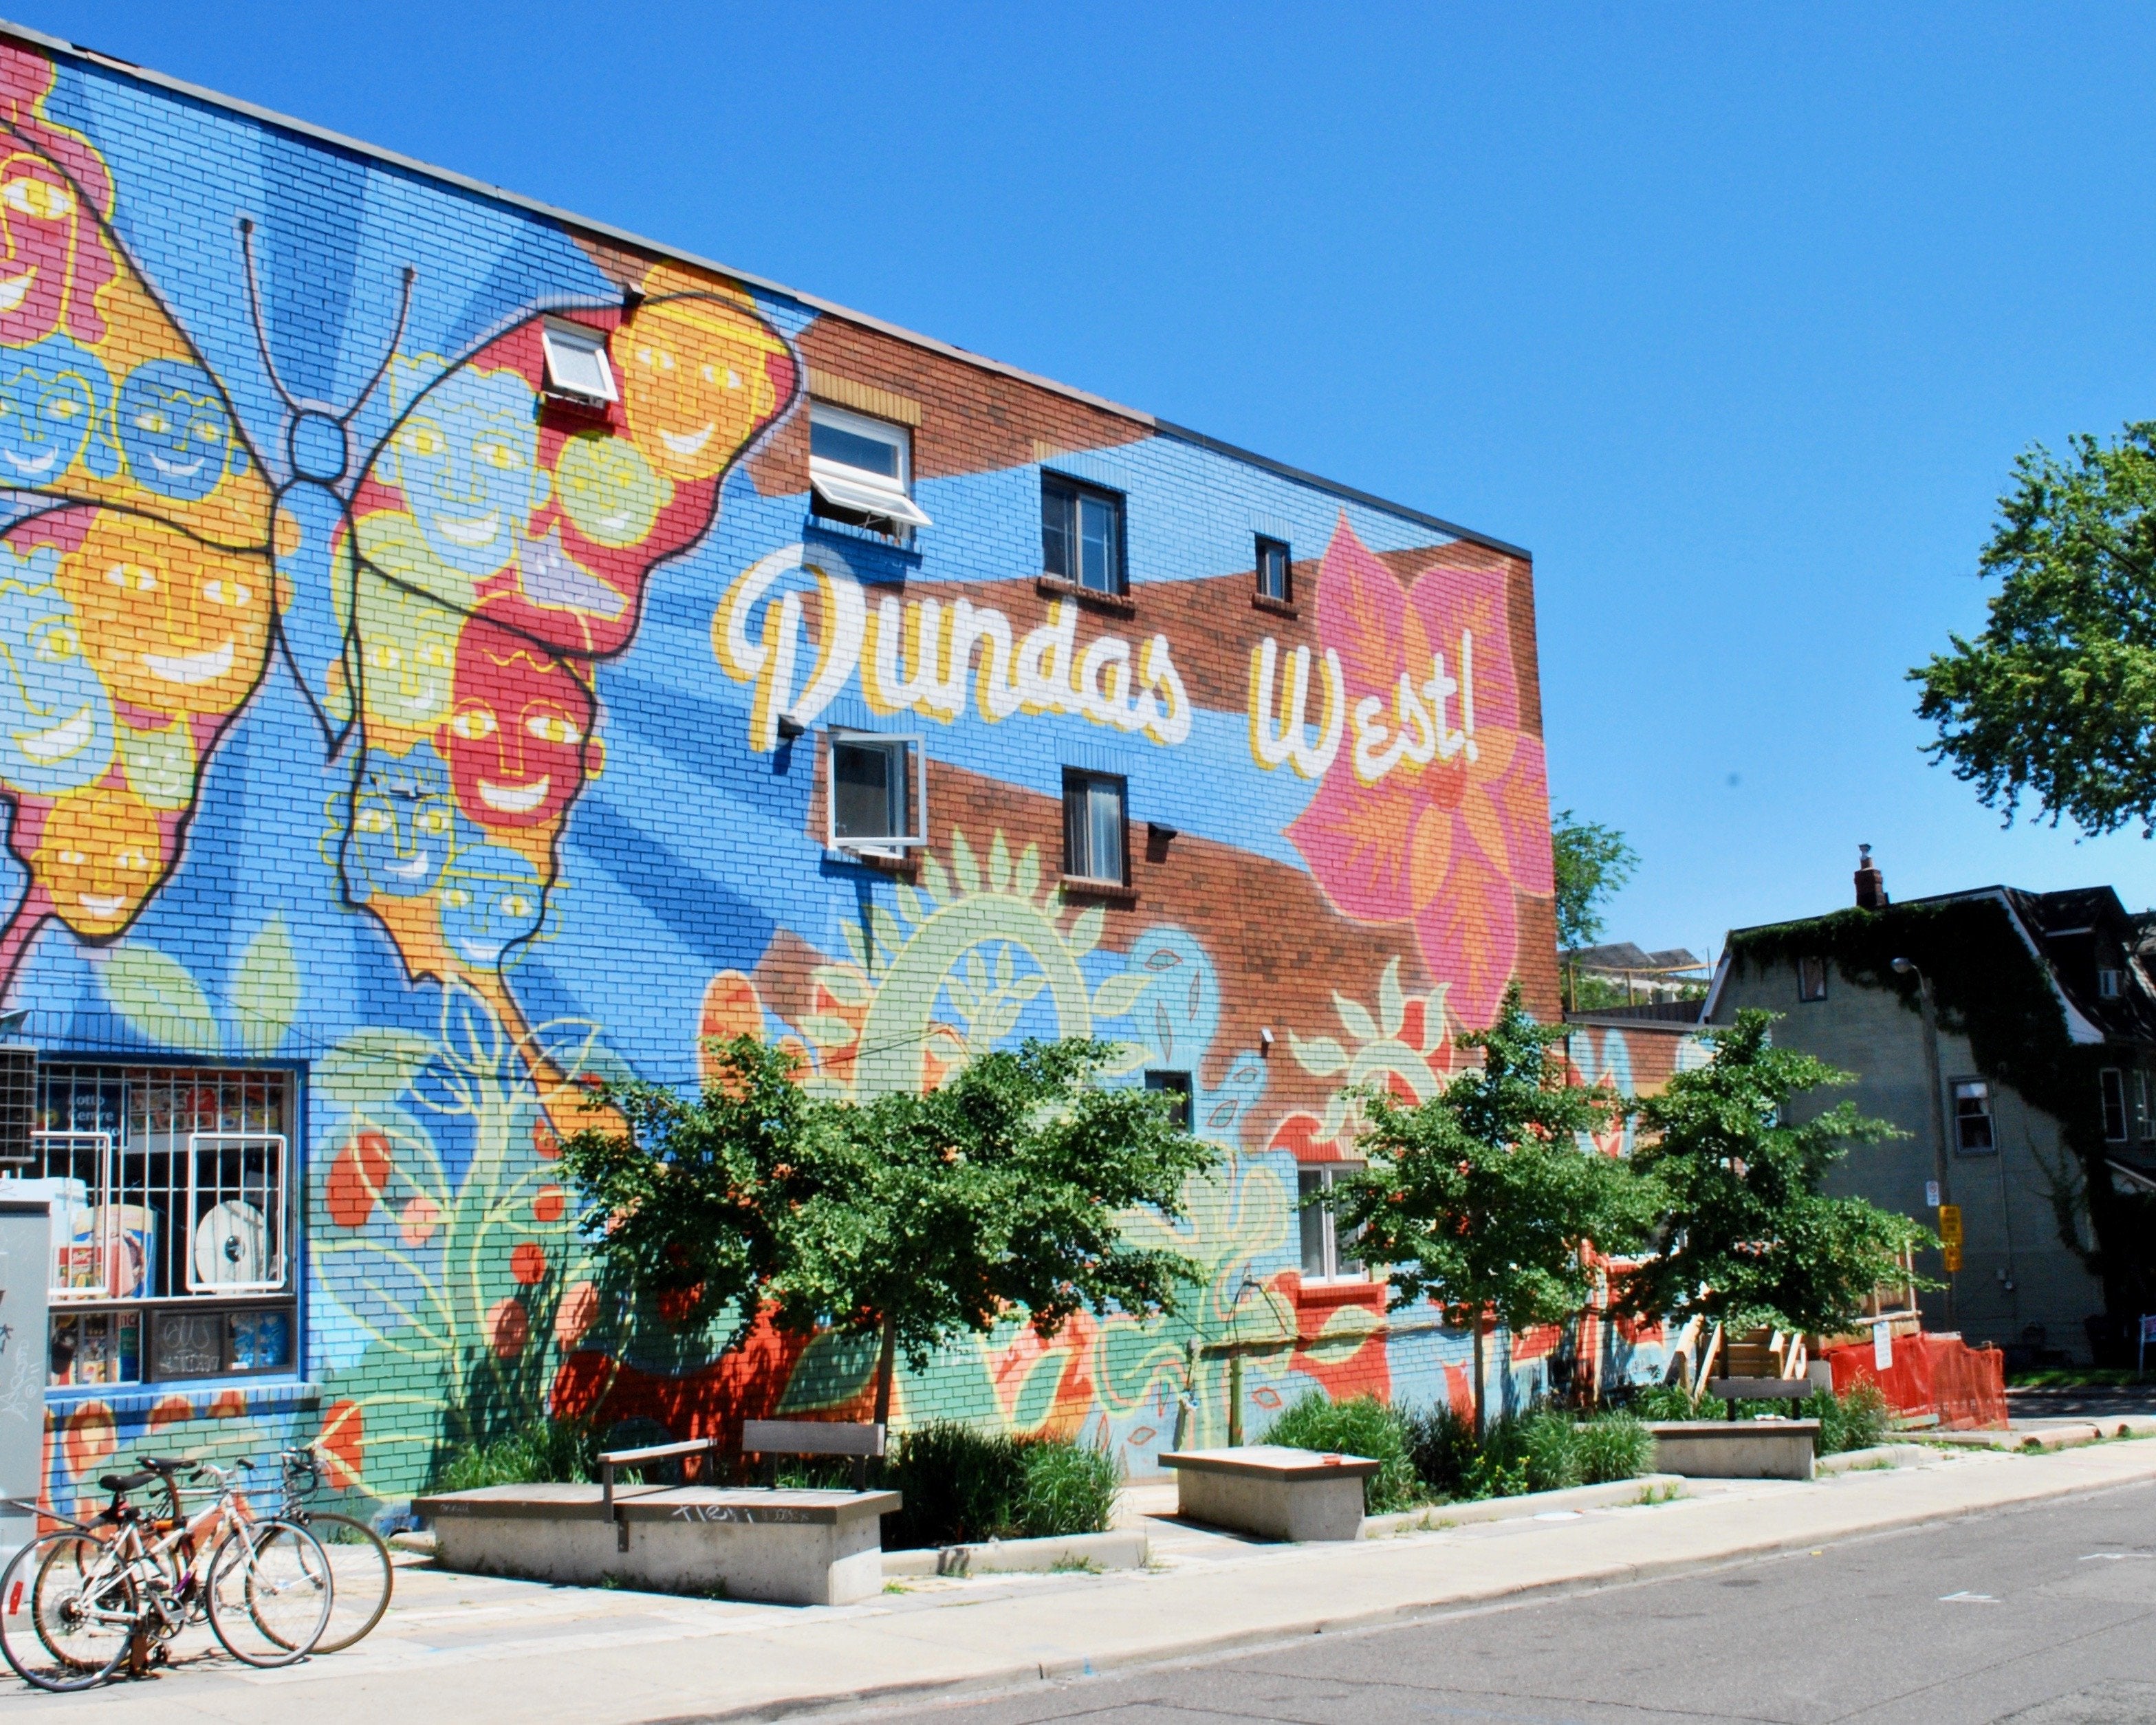 Our guide to the best of Dundas West!